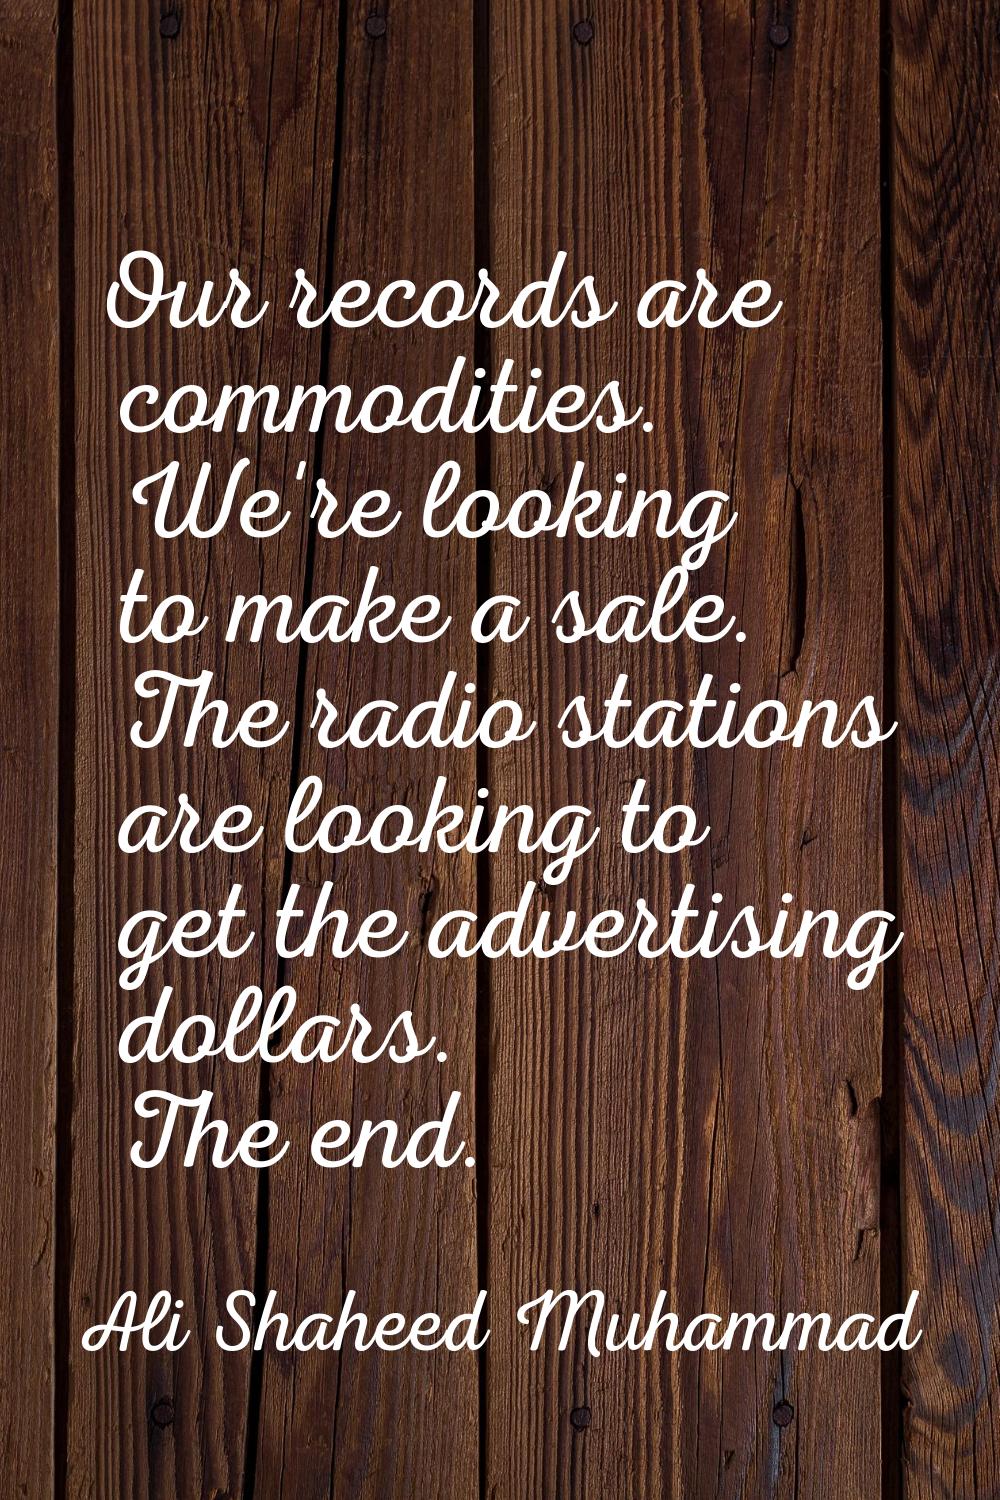 Our records are commodities. We're looking to make a sale. The radio stations are looking to get th